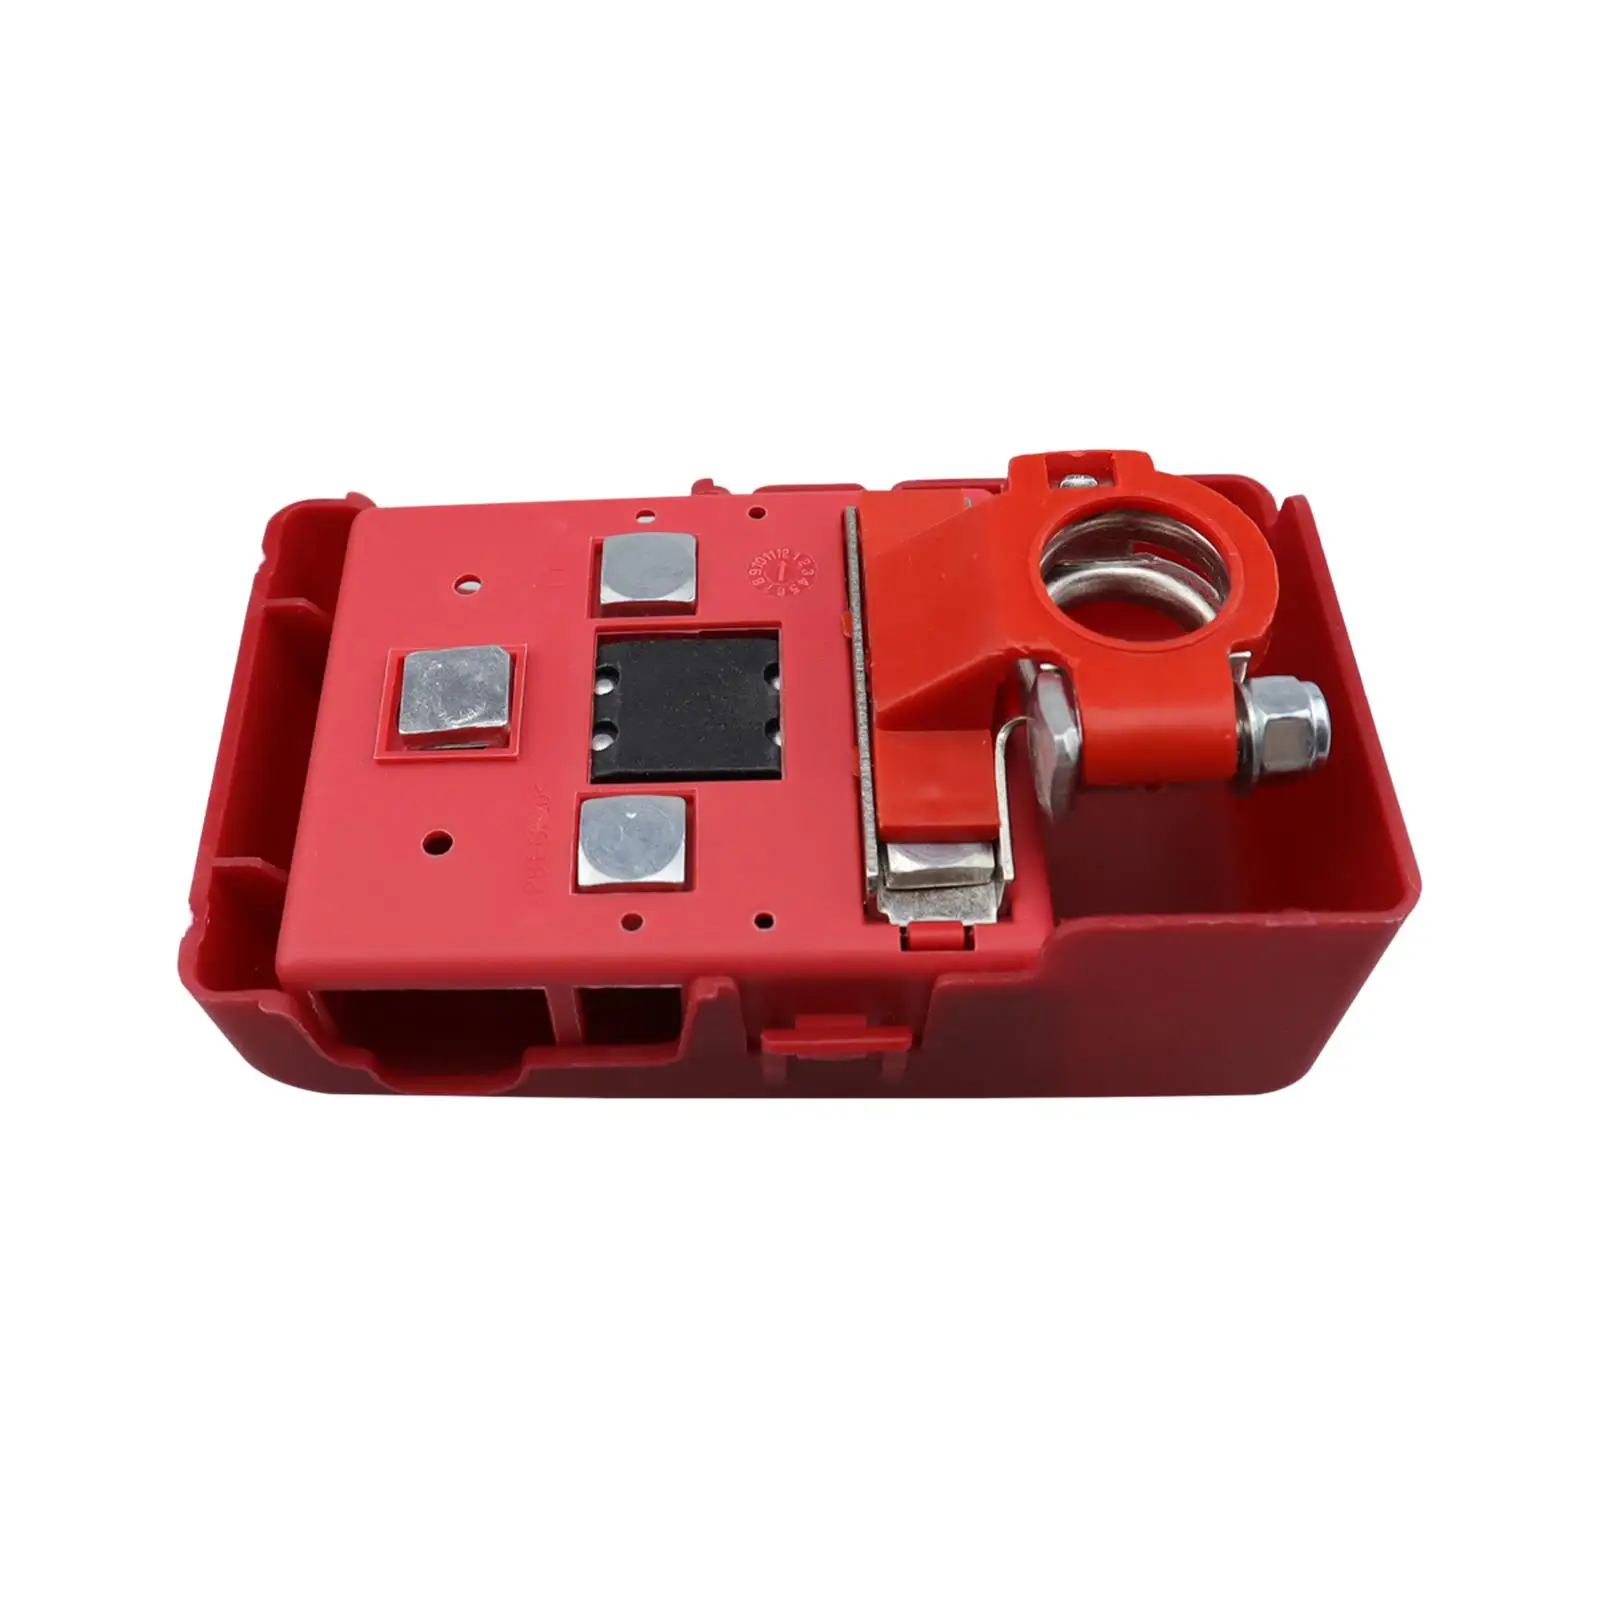 Car Battery Distribution Terminal Fuse Block Circuit Quick Release Fused Clamps Connector for 4wds Car Caravans Yachts